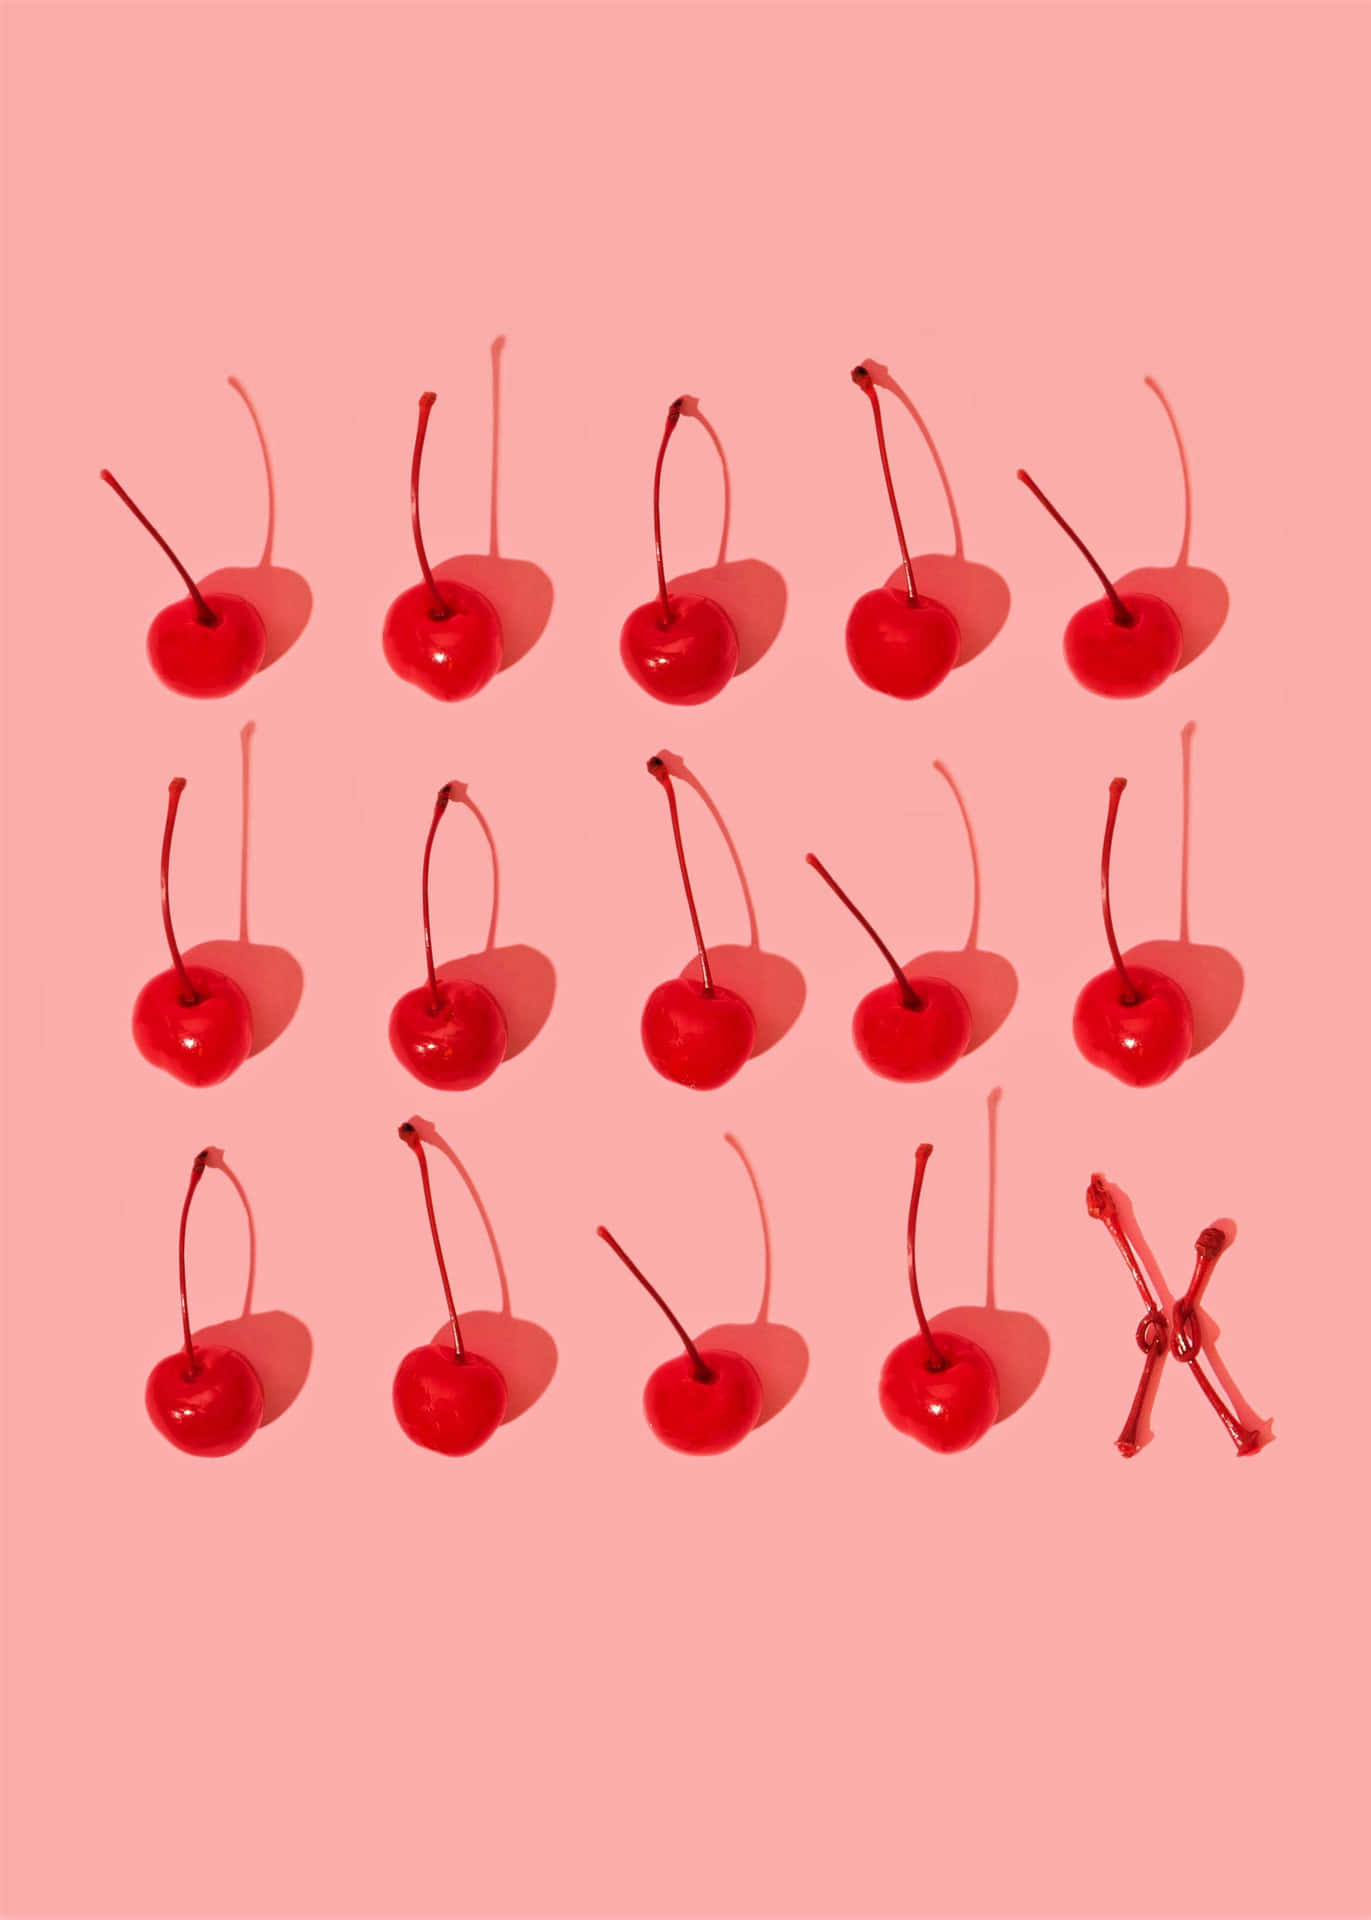 A Group Of Cherries On A Pink Background Wallpaper